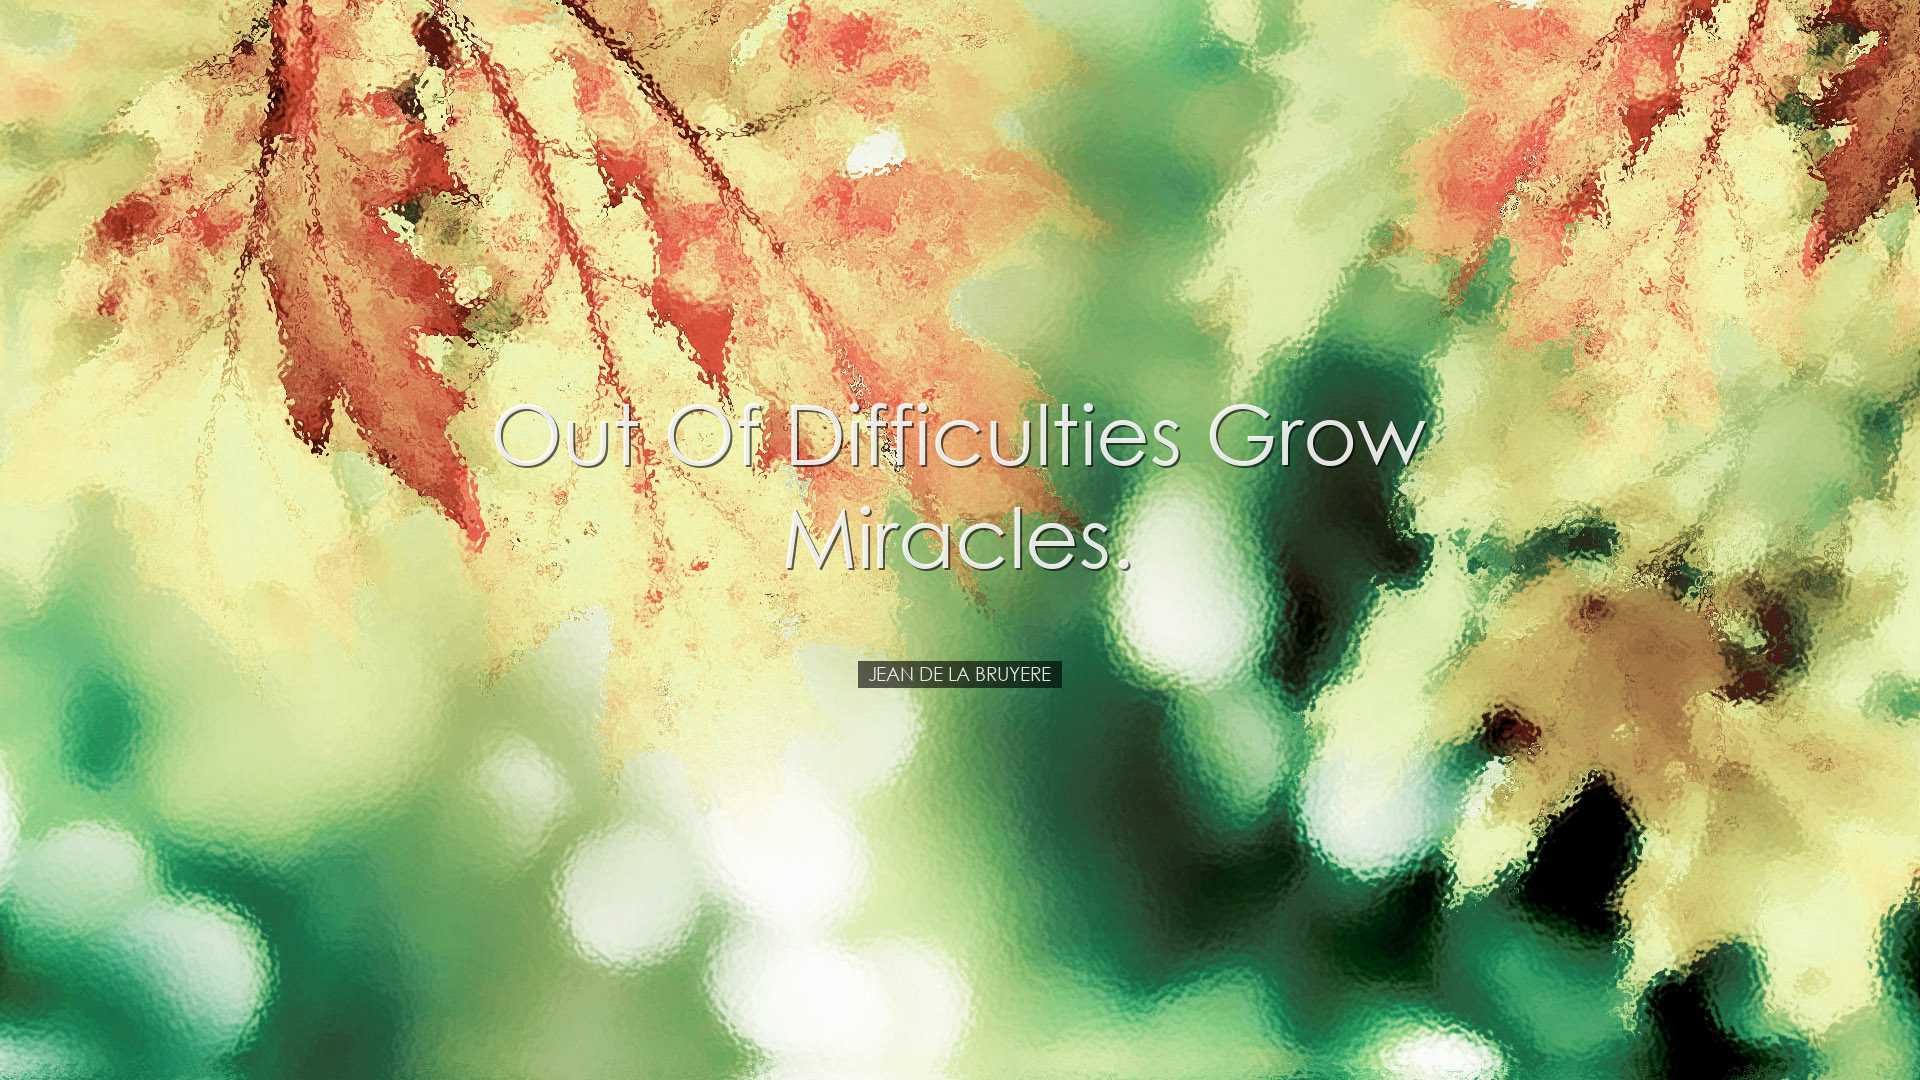 Out of difficulties grow miracles. - Jean De La Bruyere